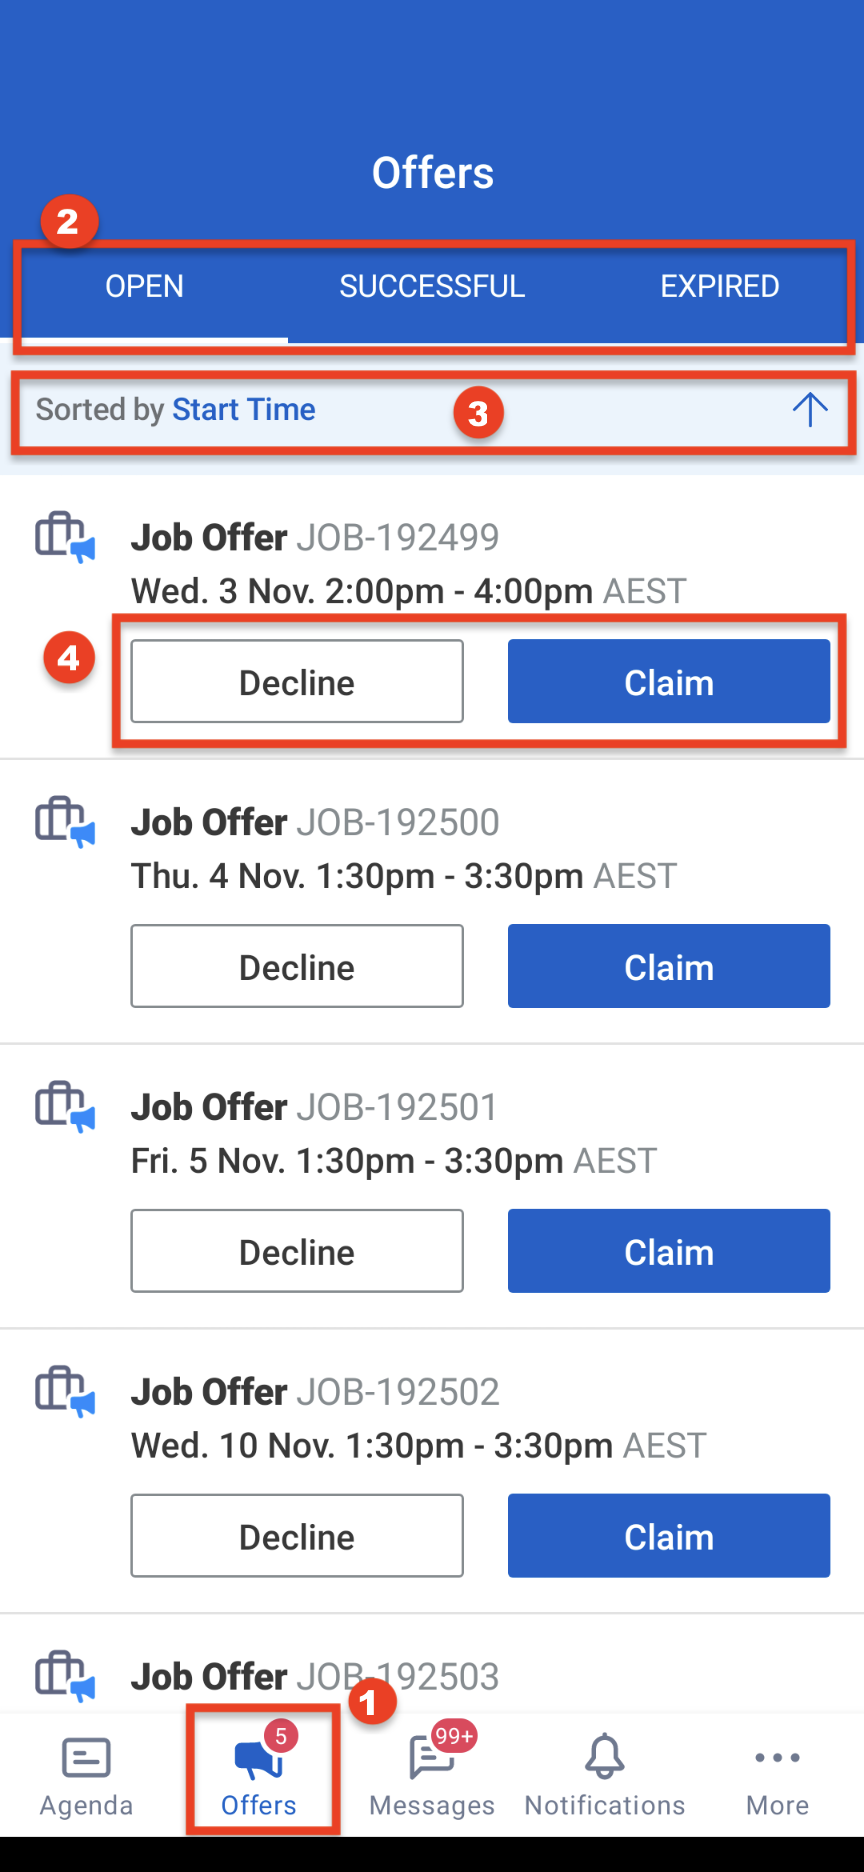 The job offers screen, showing the Offers button on the navigation menu, the Open tab with job offers, the sorting menu, and the Open, Successful, and Expired tabs.